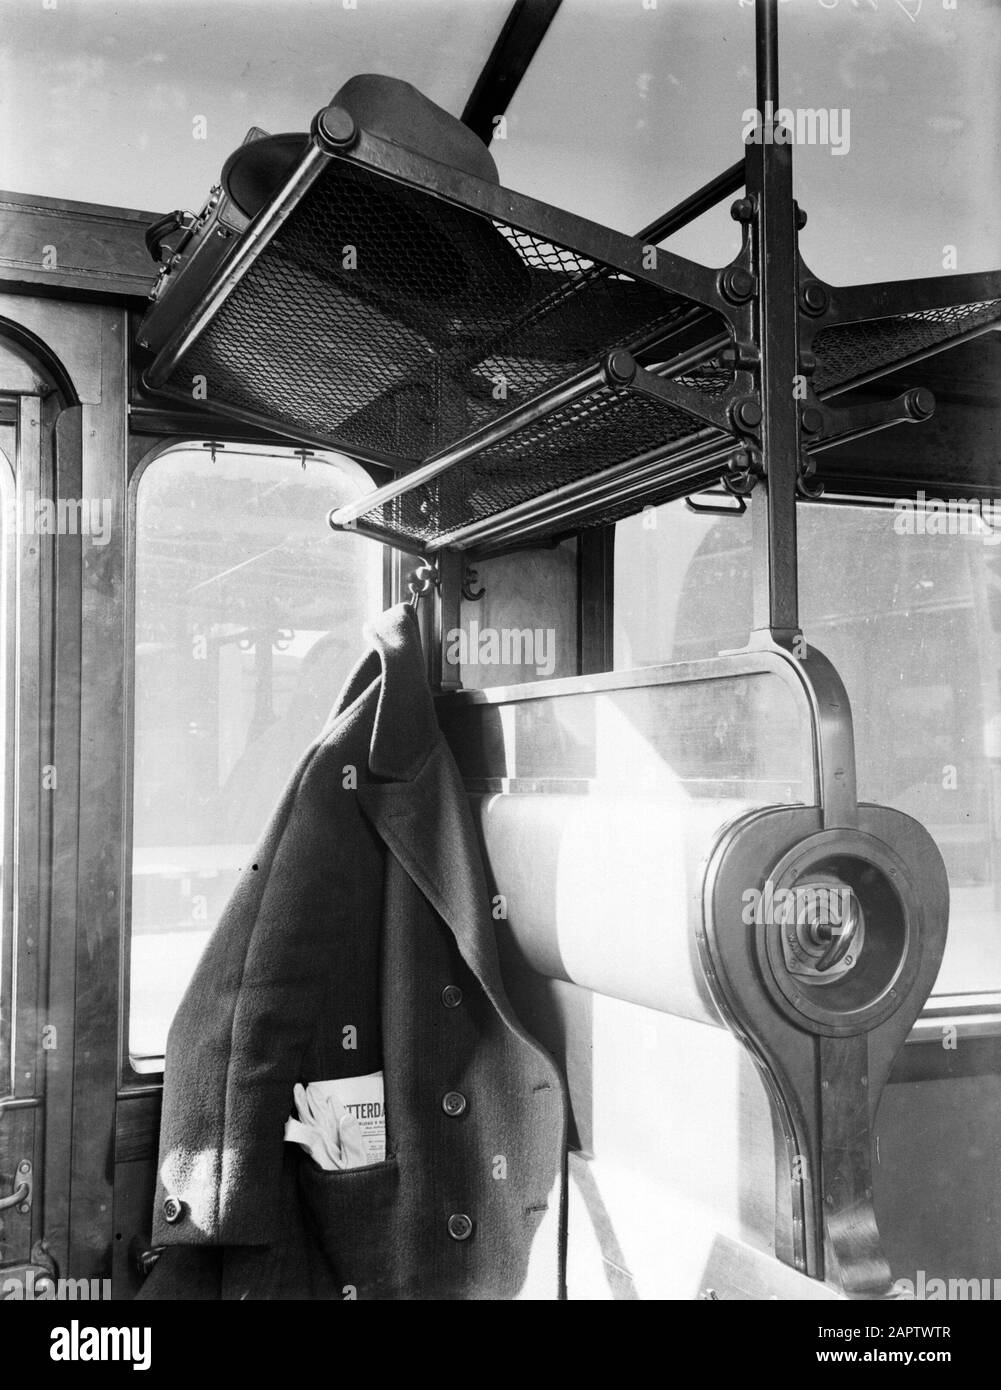 Reportage Nederlandse Spoorwegen  Interior of a train oupé: hanging jacket with newspaper in inner pocket, suitcase, luggage racks and benches Annotation: In the jacket an axemplaar of the Nieuwe Rotterdamsche - Courant. - Yeah. Date: 1932 Location: Amsterdam, Noord-Holland Keywords: interior, newspapers, railways, wagons Stock Photo